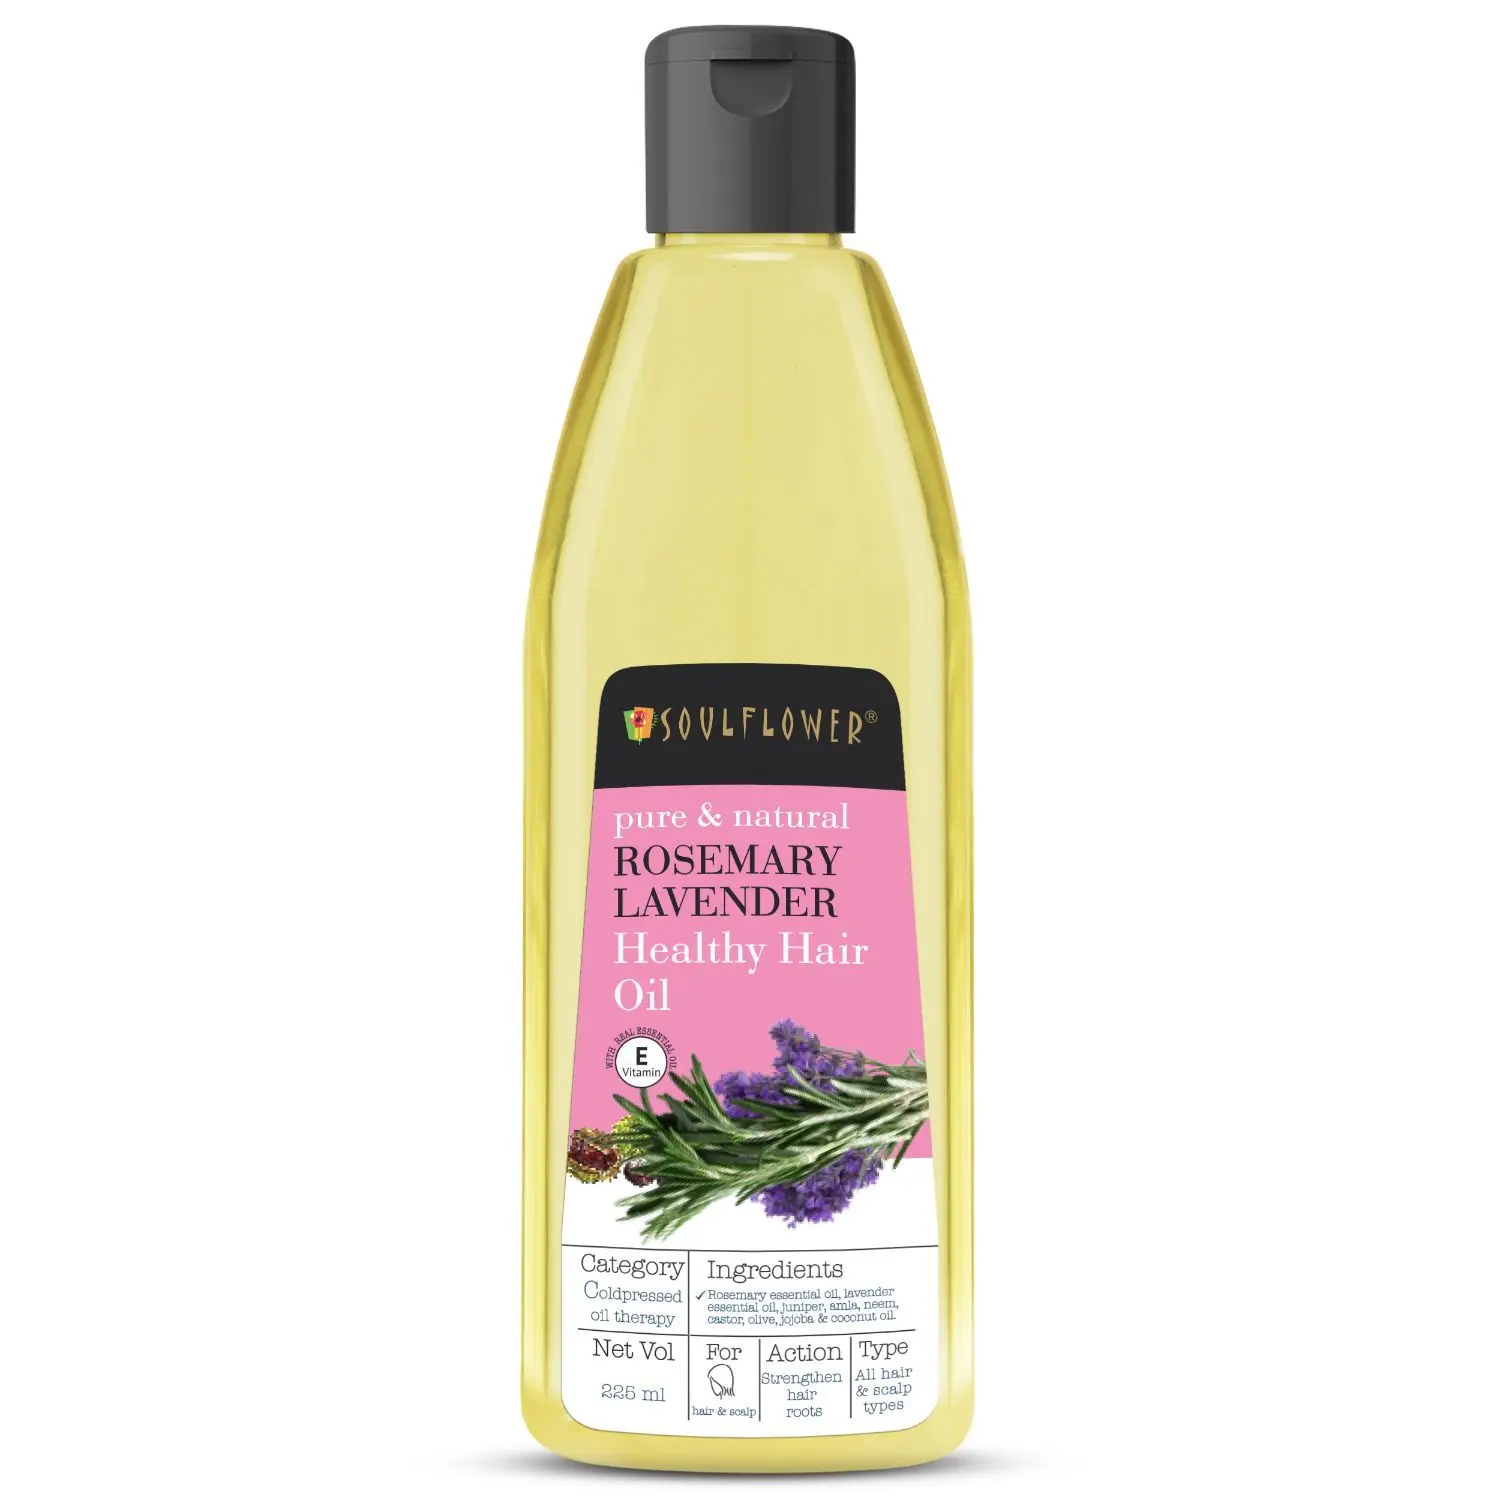 Soulflower Coldpressed Rosemary Lavender Healthy Hair  hair growth formulation,  Pure and Natural, 225ml